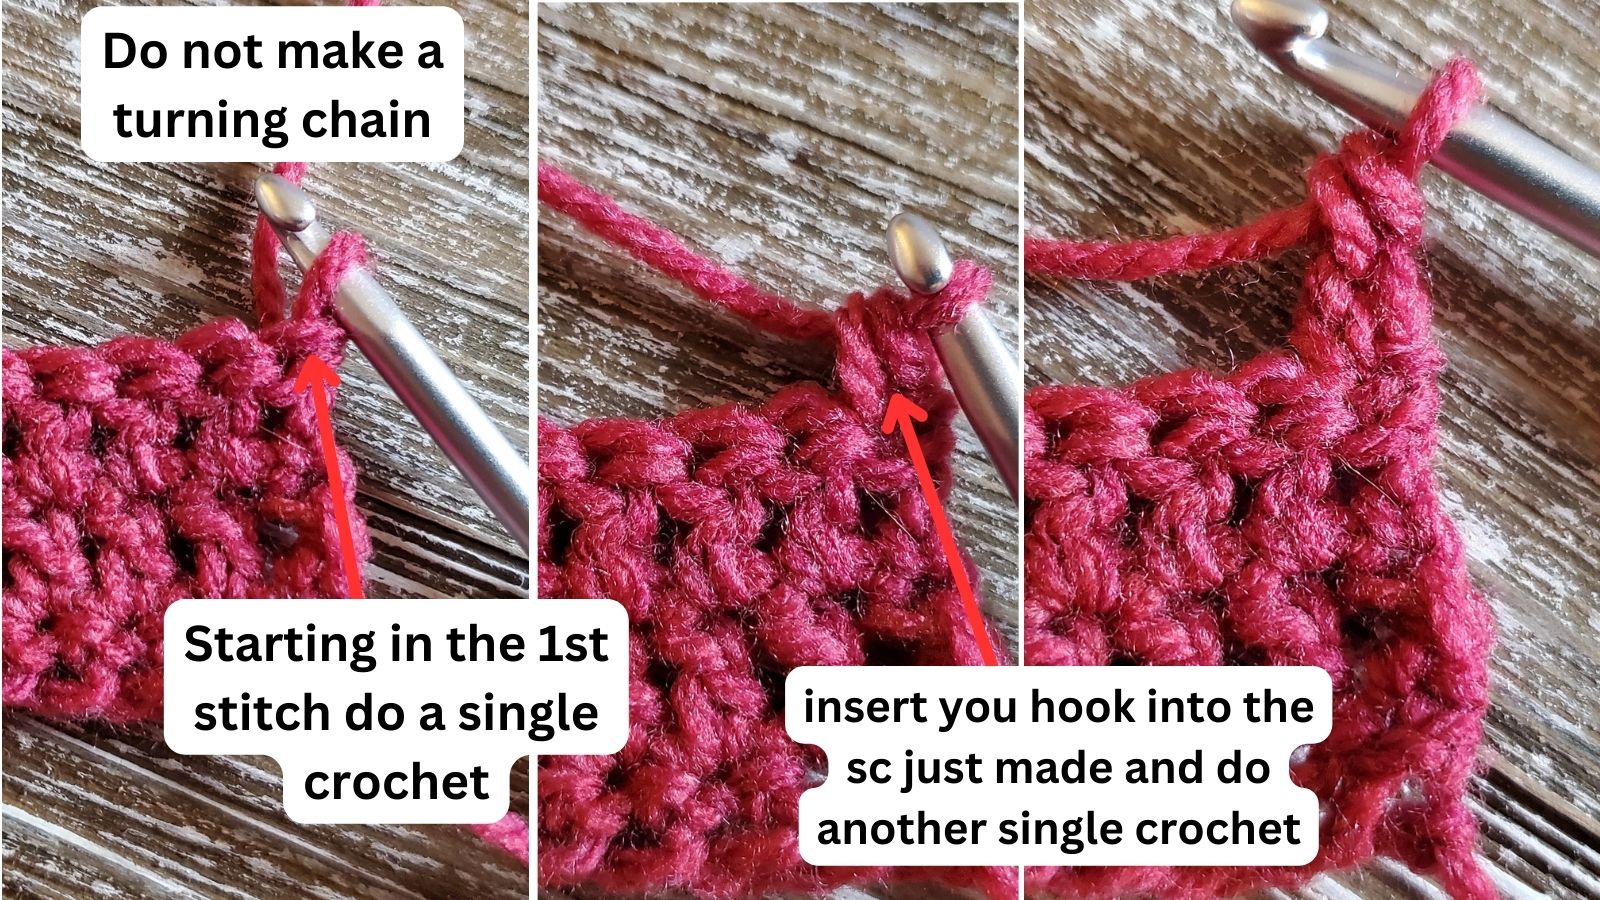 Doing a single crochet into a single crochet instead of a turning chain at the beginning of the row.